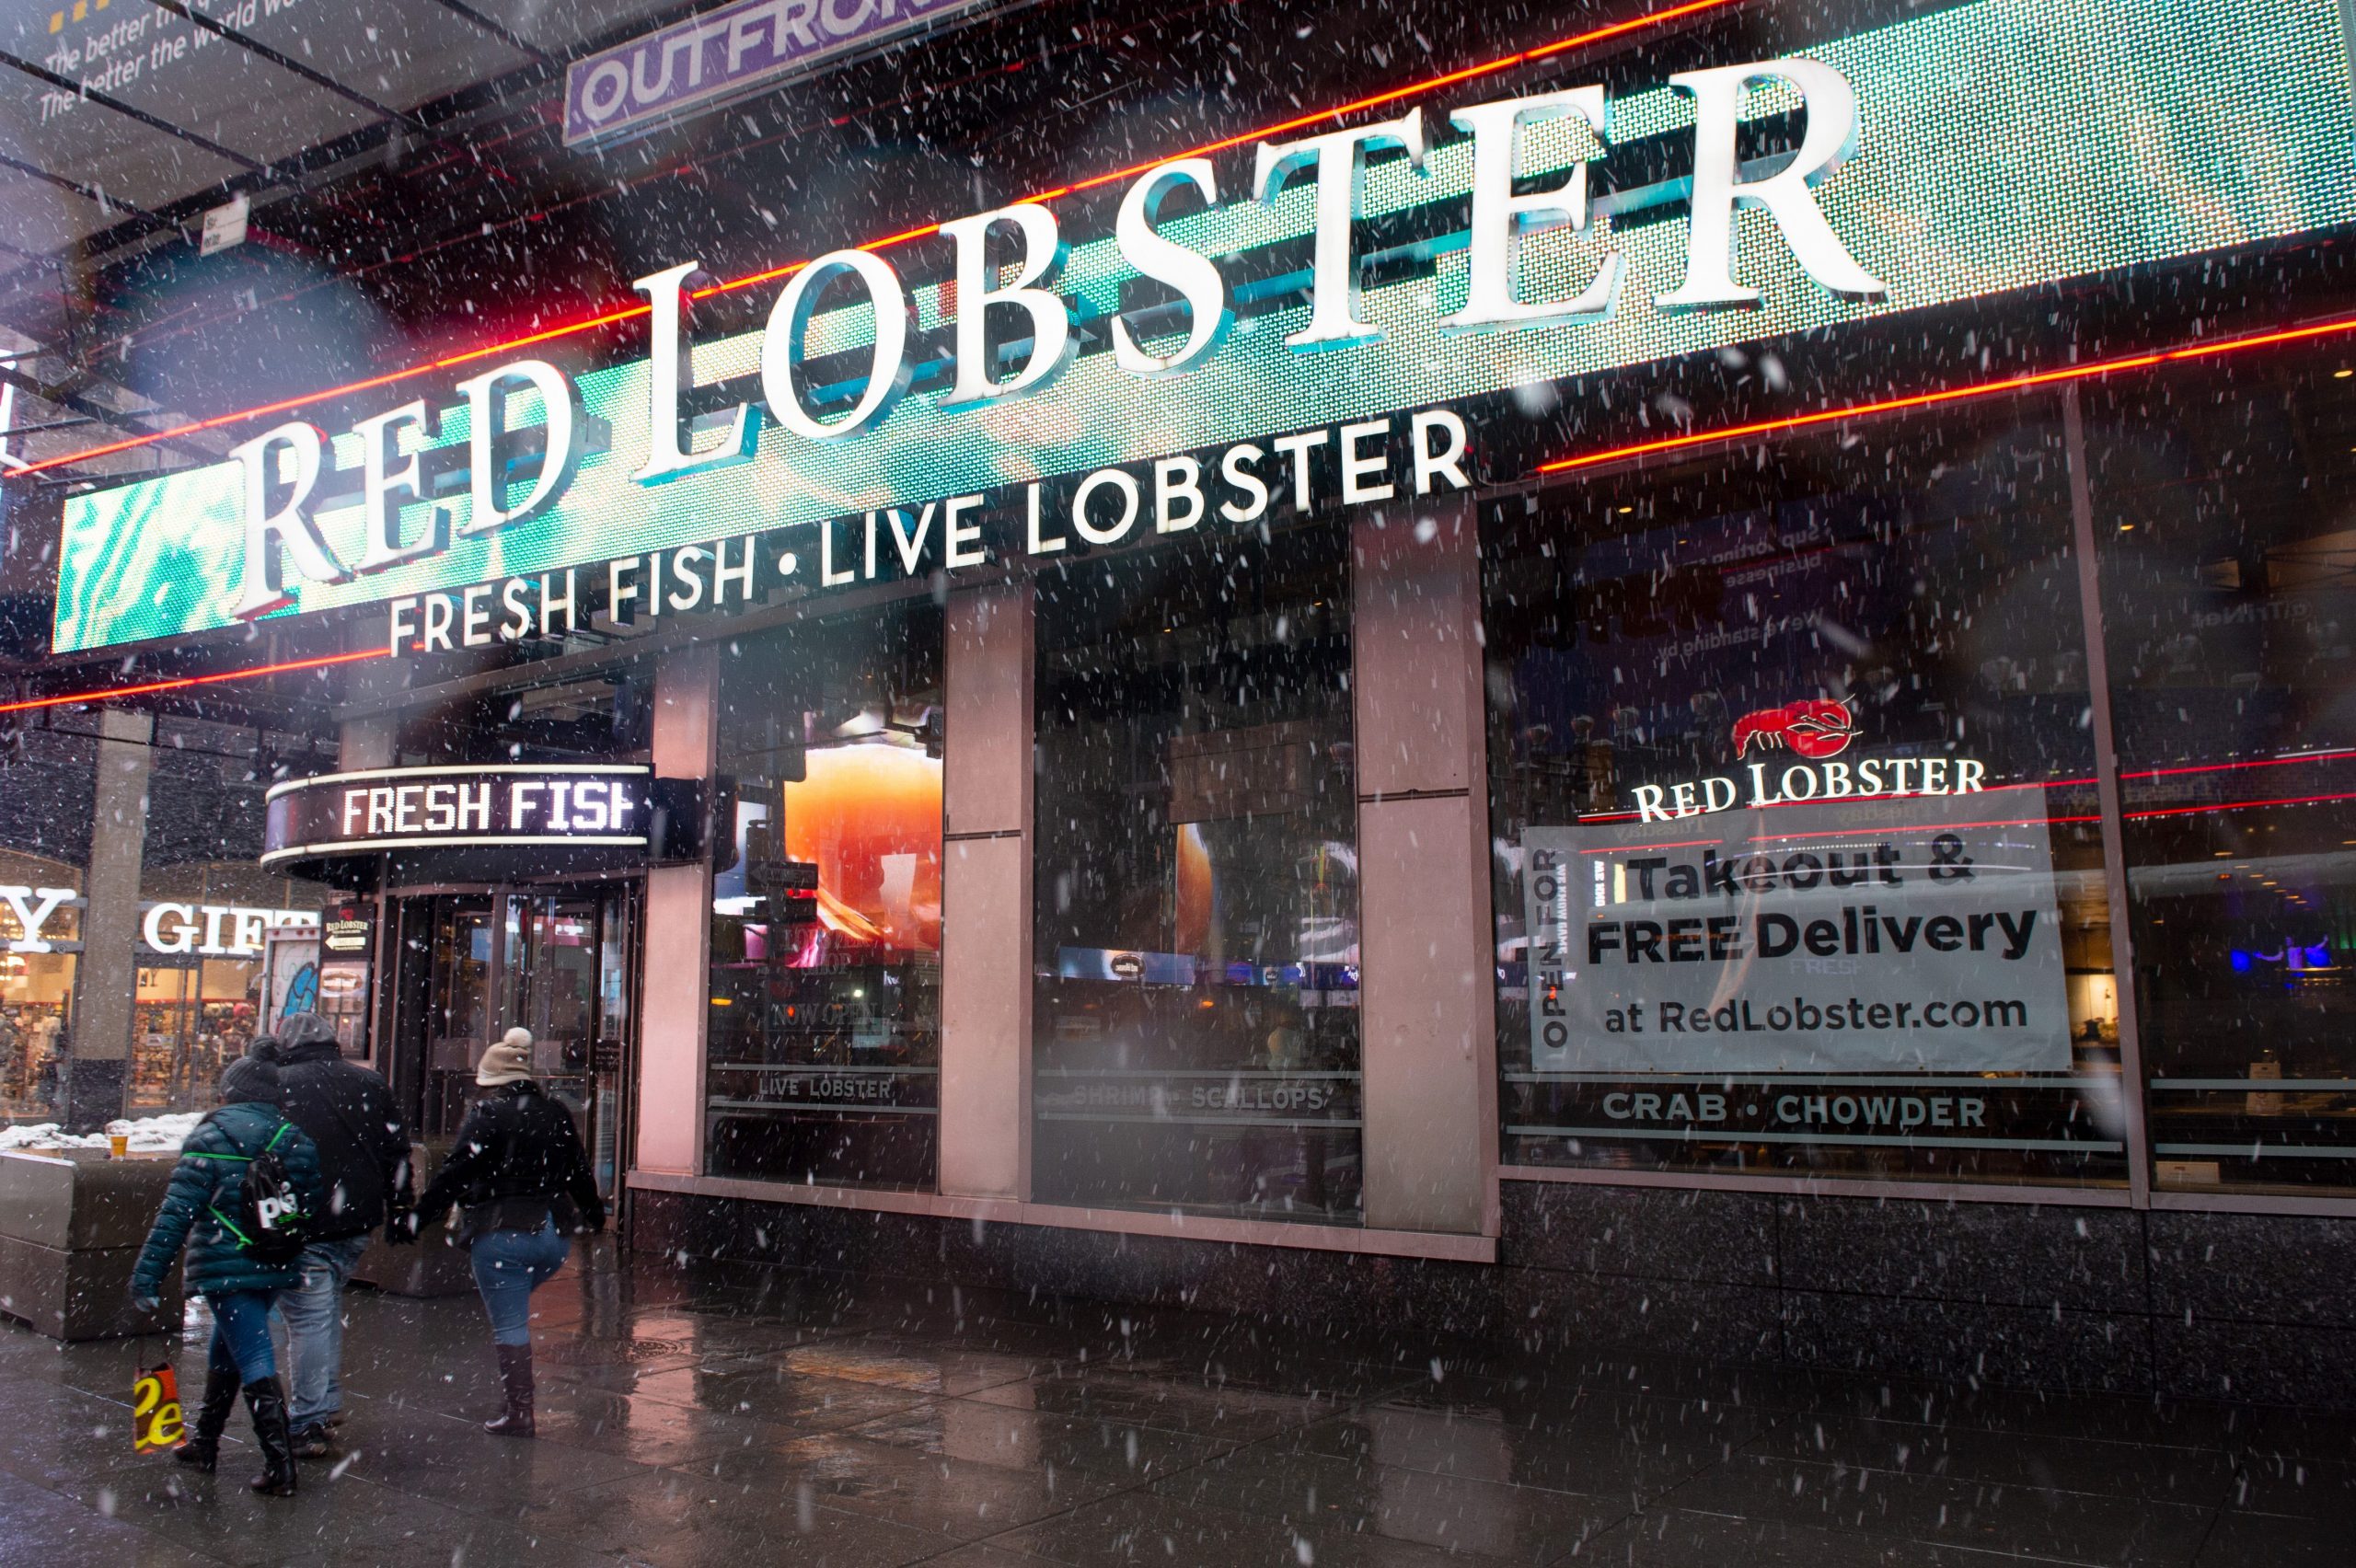 A "takeout and Free delivery" sign is displayed in the window of Red Lobster in Times Square during a snow storm on February 07, 2021 in New York City.